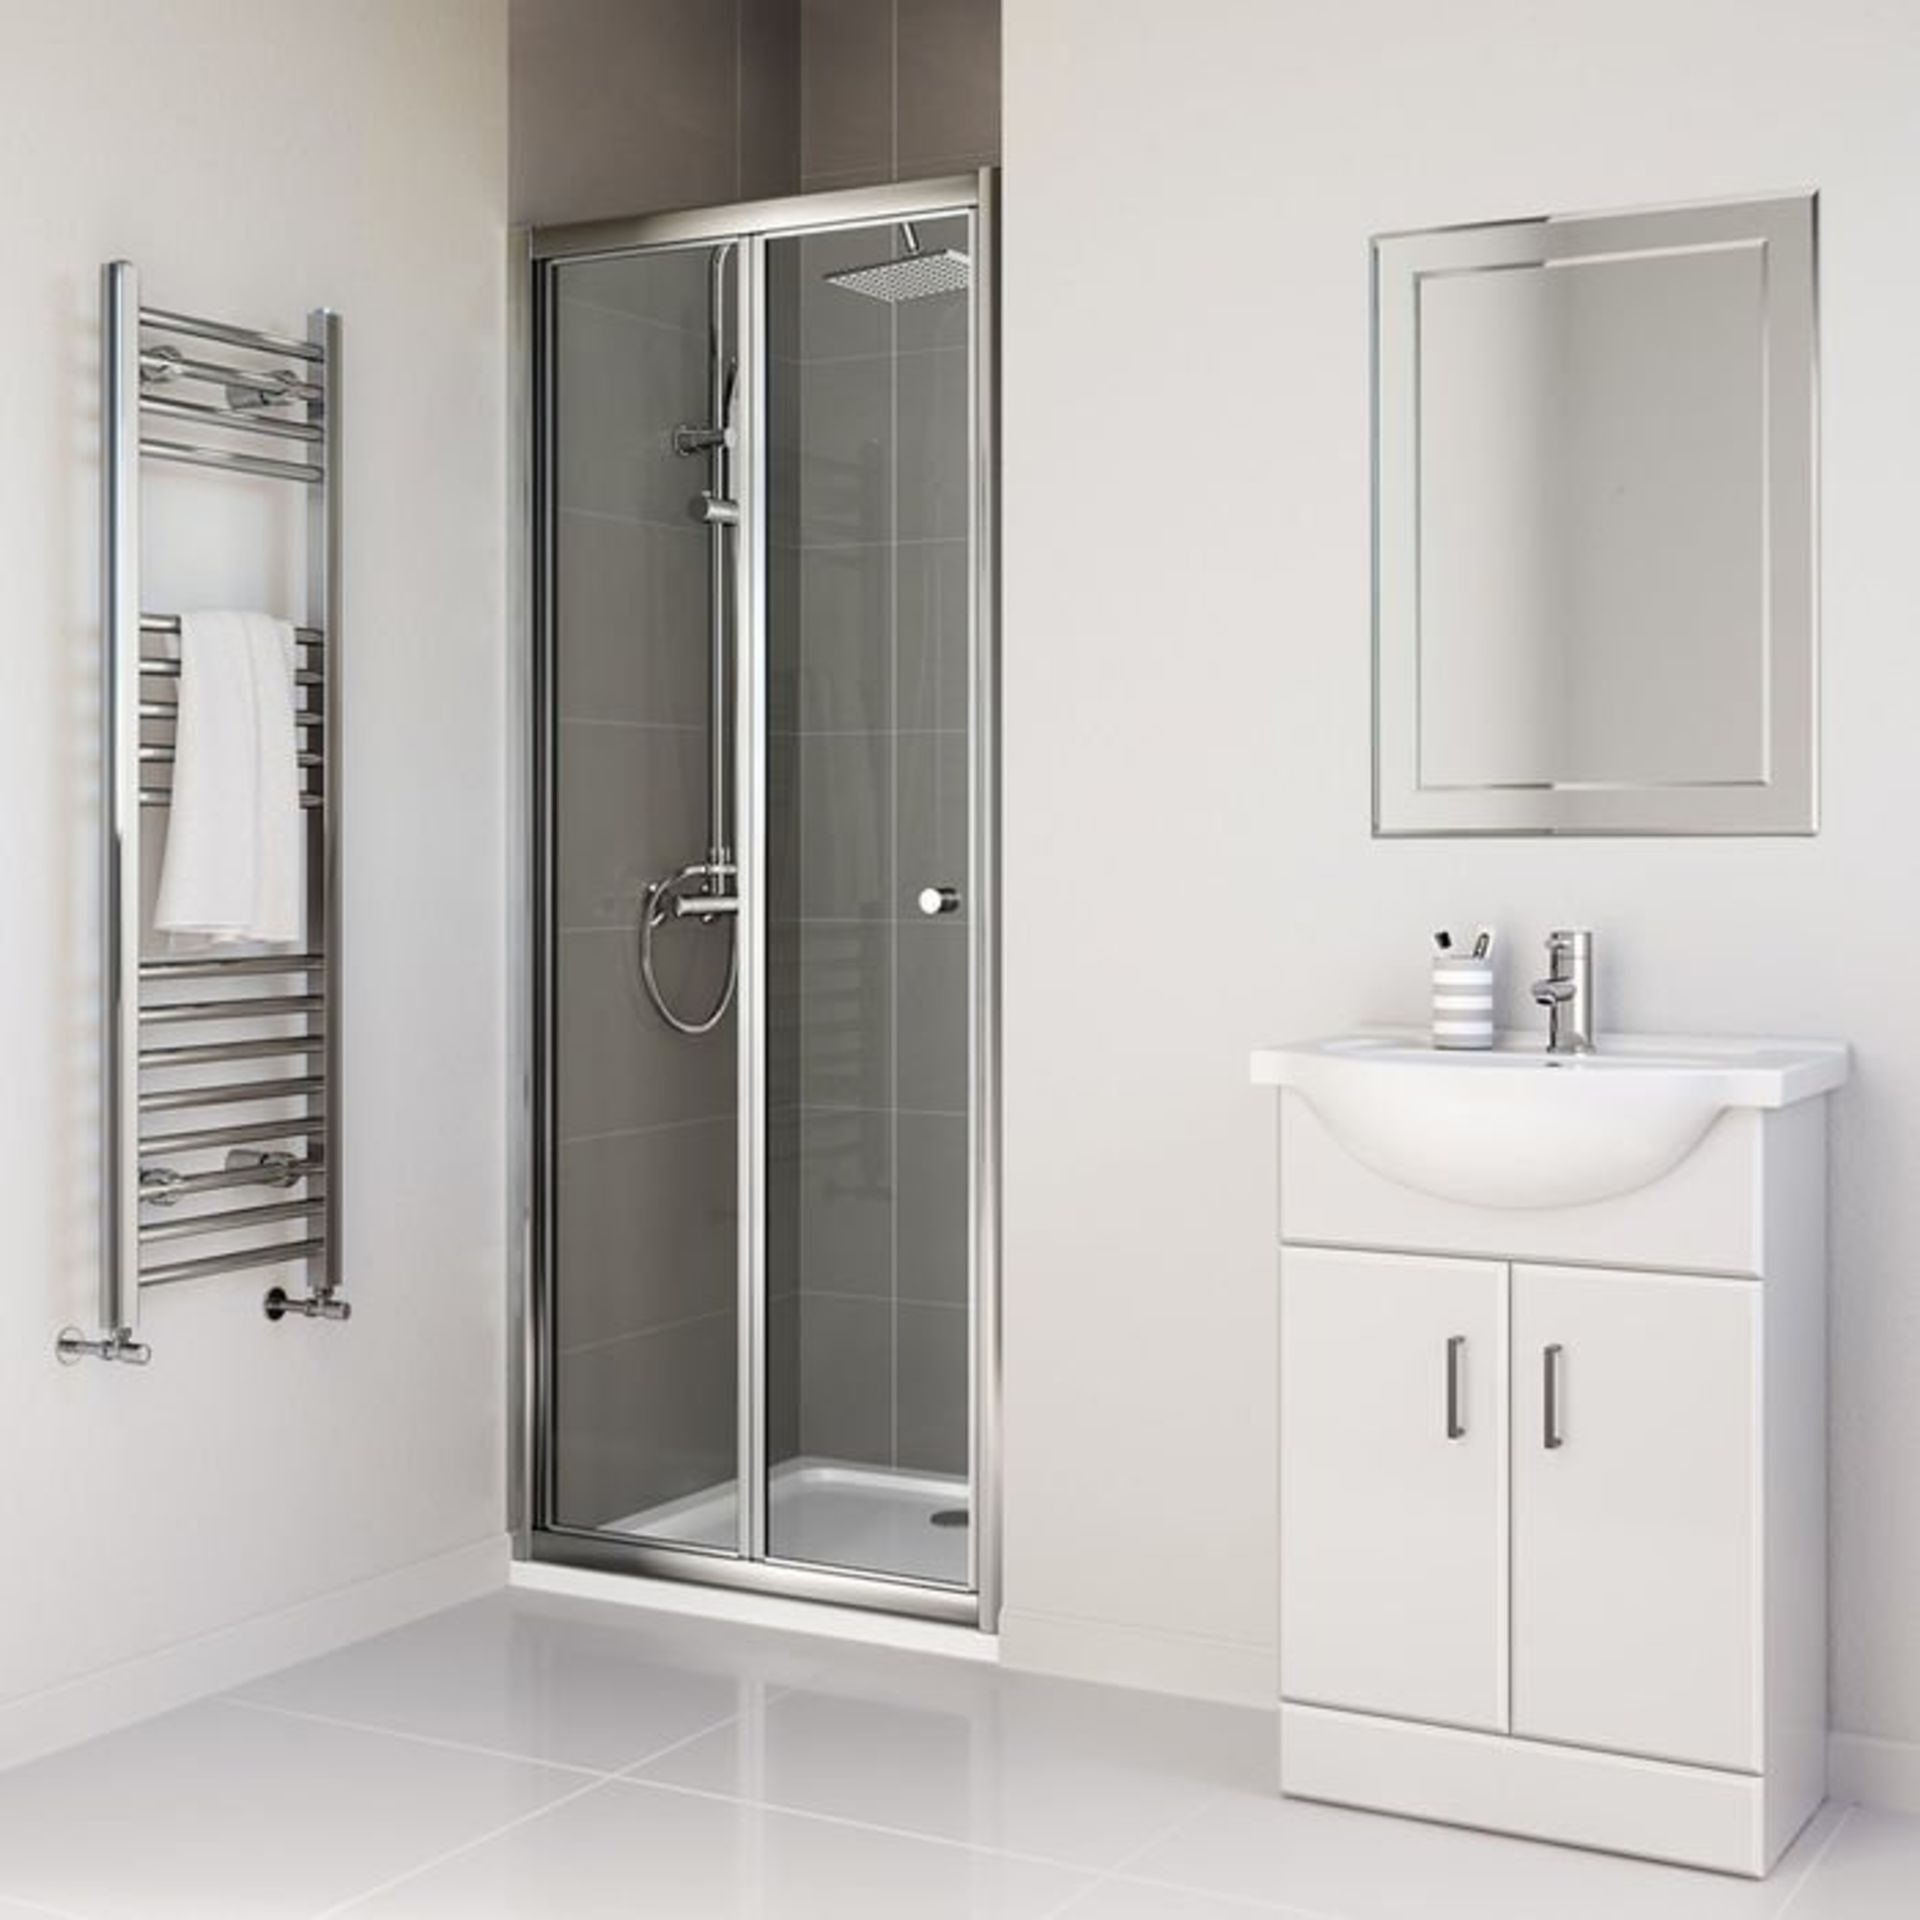 (A21) 900mm - Elements Bi Fold Shower Door RRP £299.99 4mm Safety Glass Fully waterproof tested with - Image 3 of 3